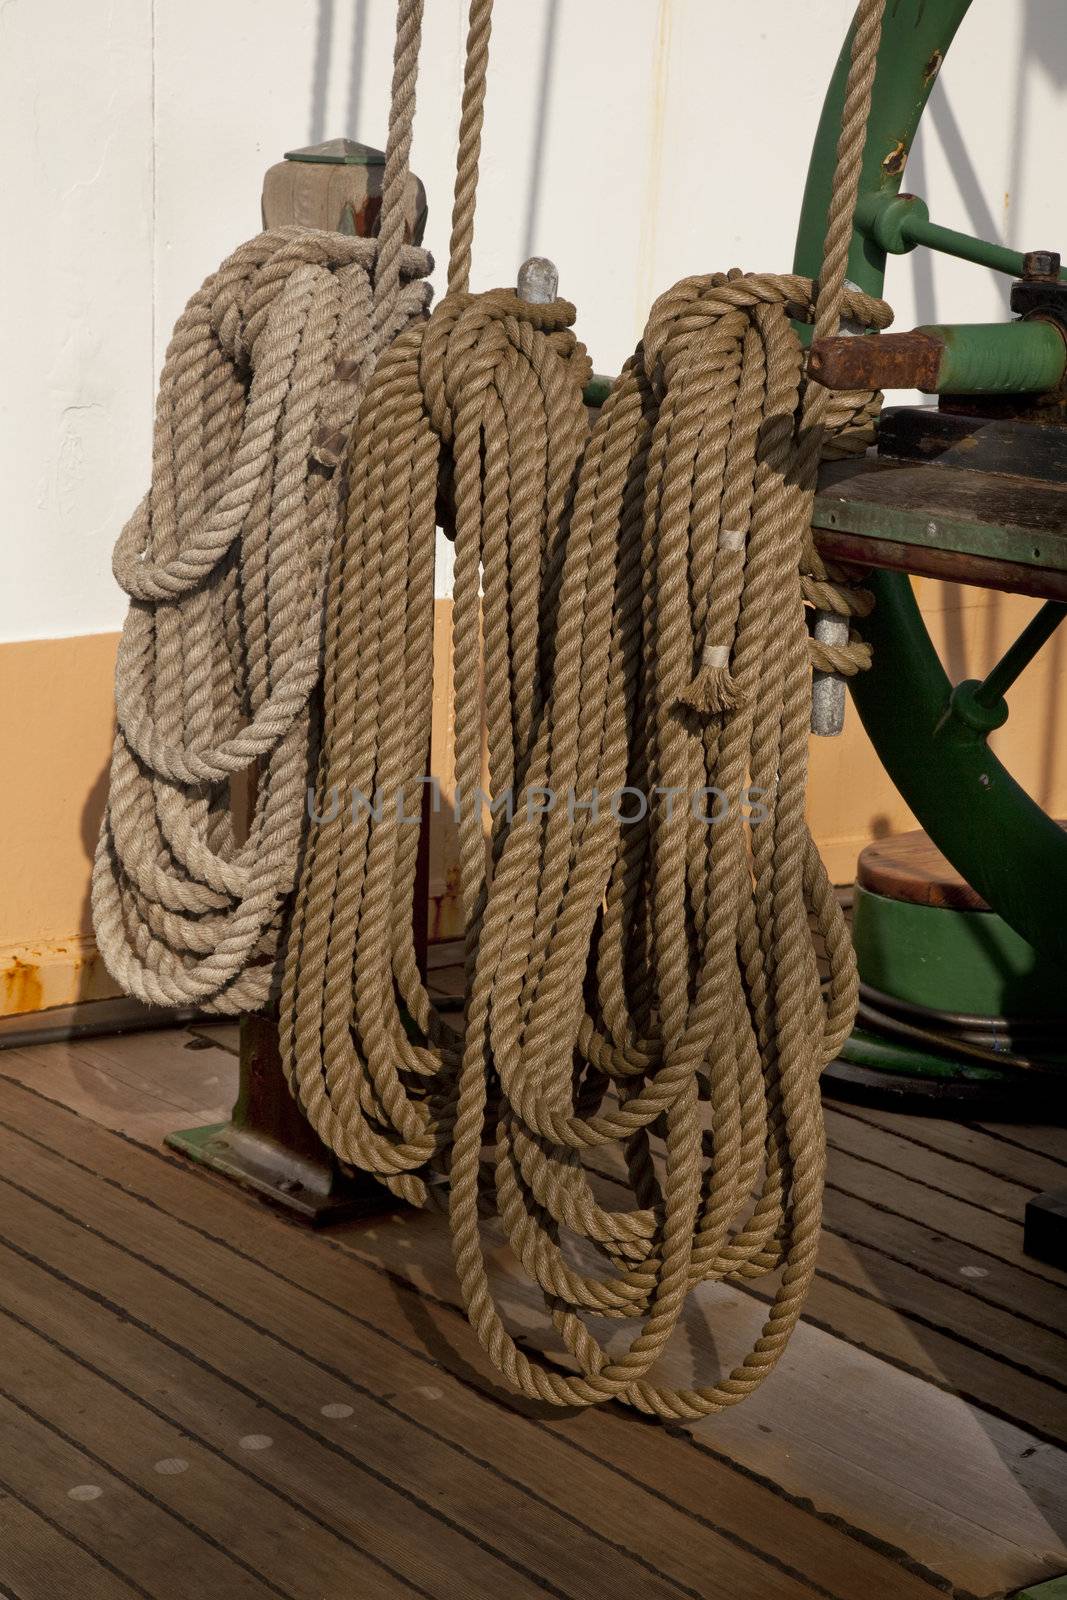 coiled ropes and winch by PixelsAway